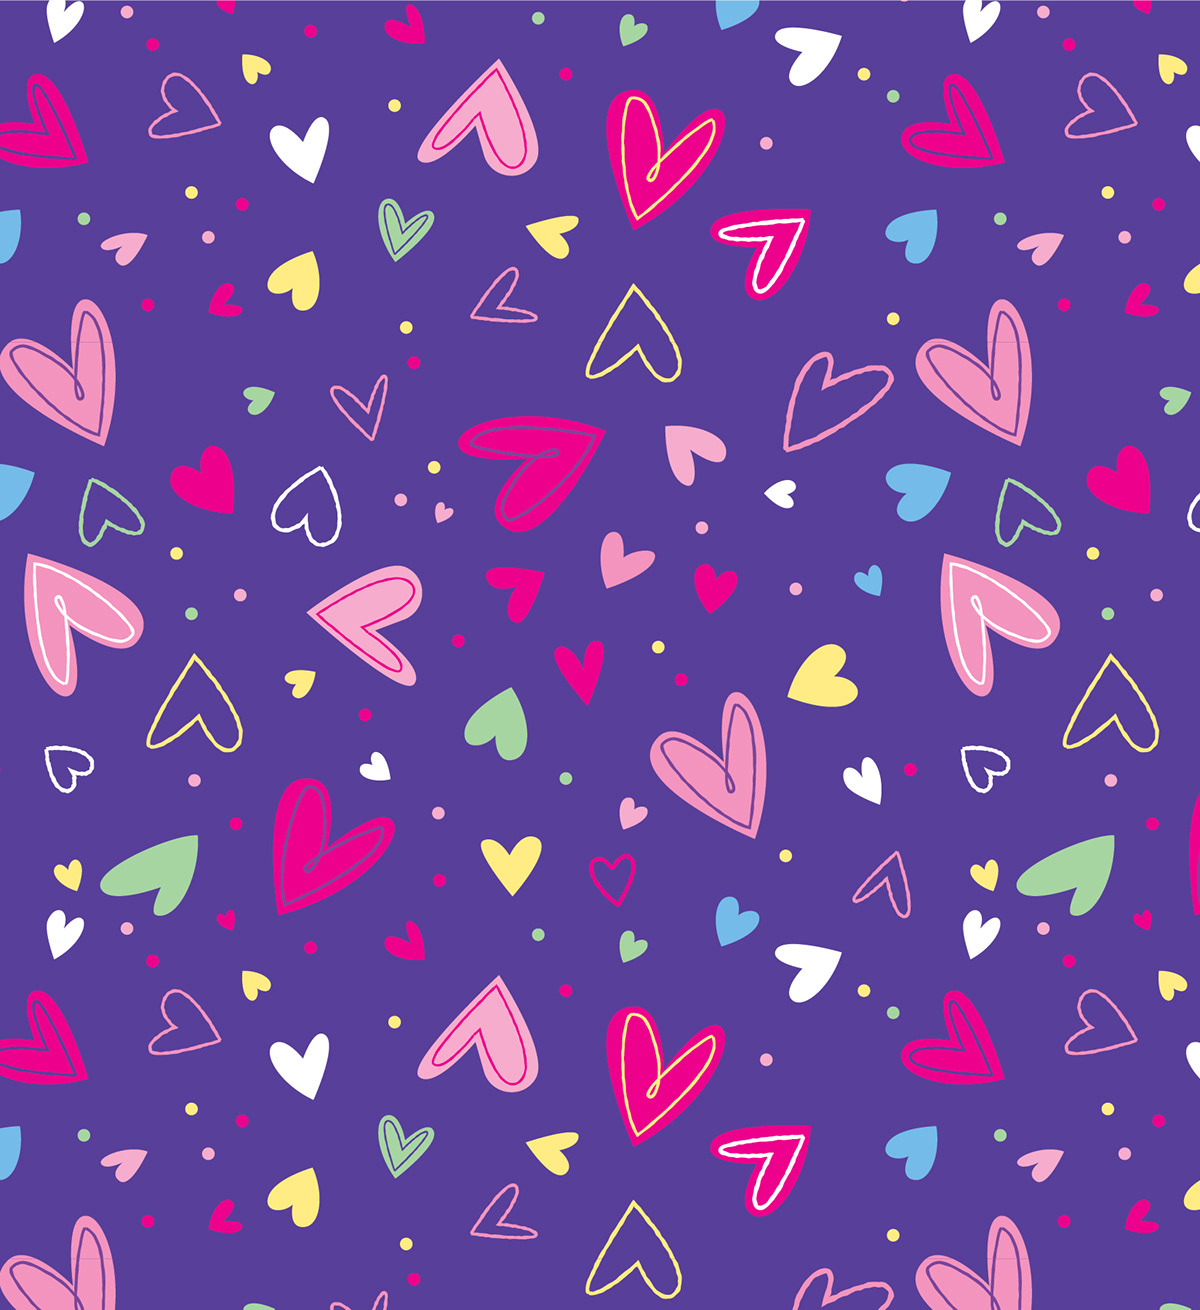 fabric surface design Surface Pattern surface pattern design bees Valentine's Day valentines day valentines Valentine's fabrics